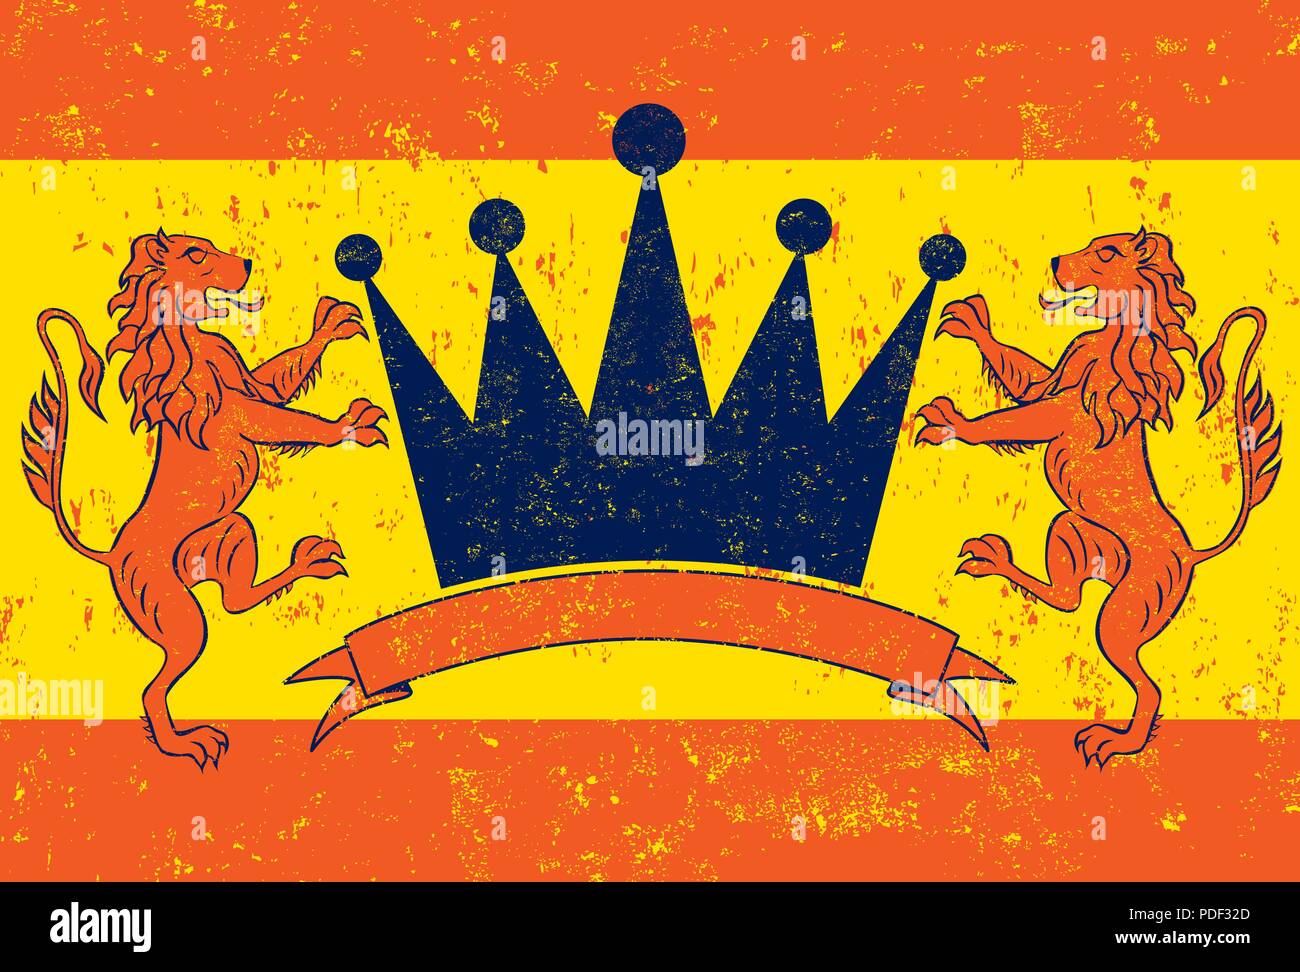 Orange Lion Crown. Hand drawn heraldic lions holding a crown along with a banner for text. Stock Vector